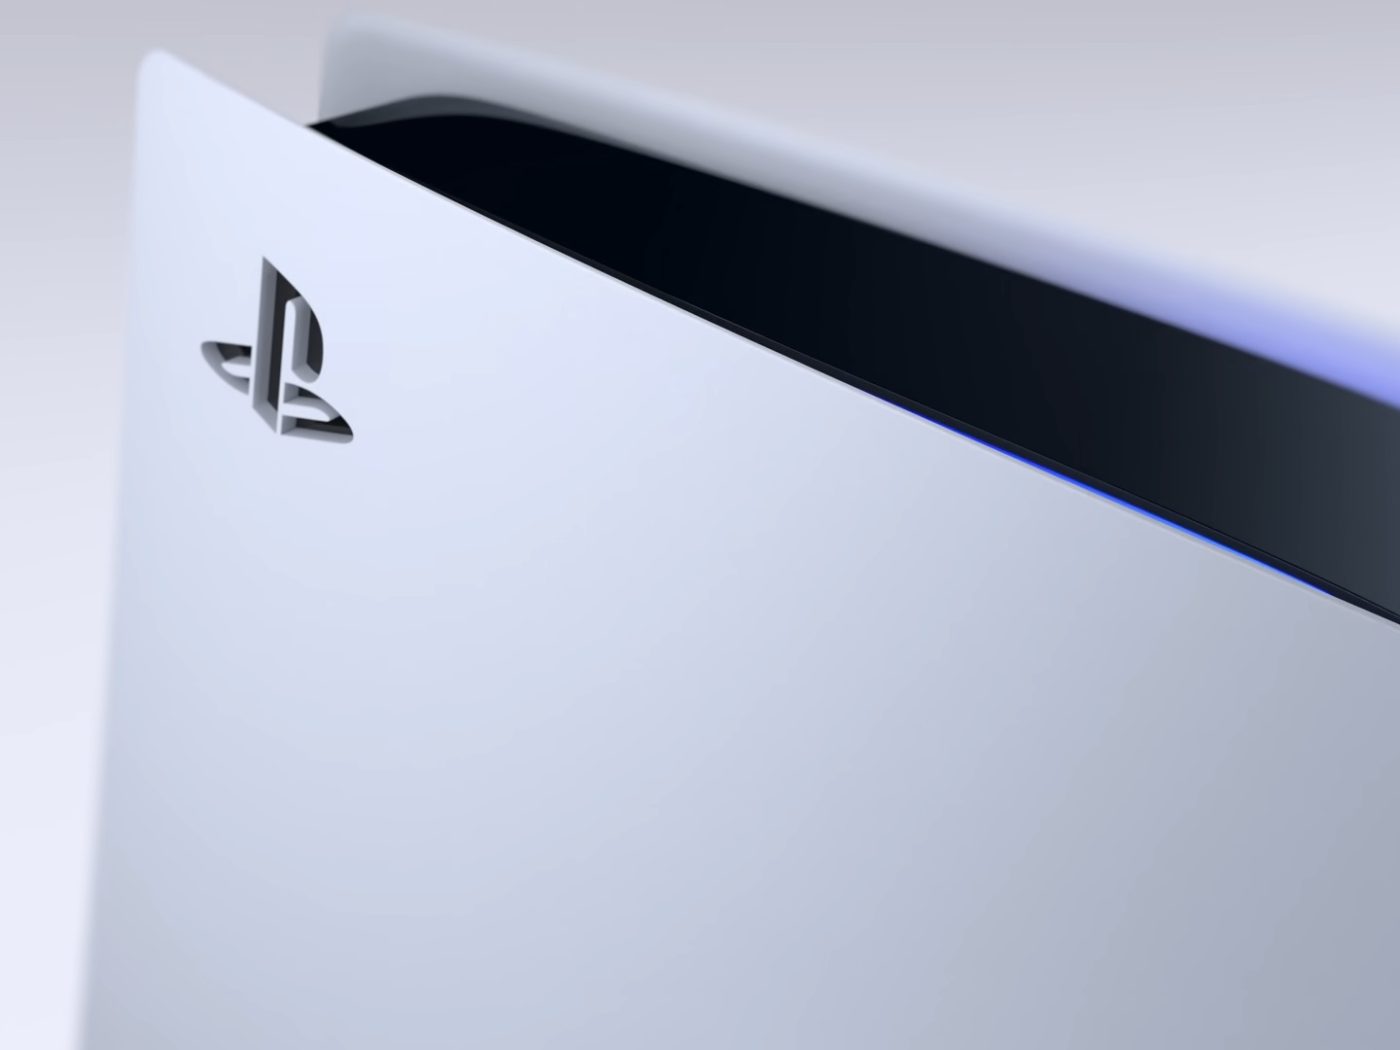 Sony's new PlayStation 5 slim consoles: where to get it - The Verge